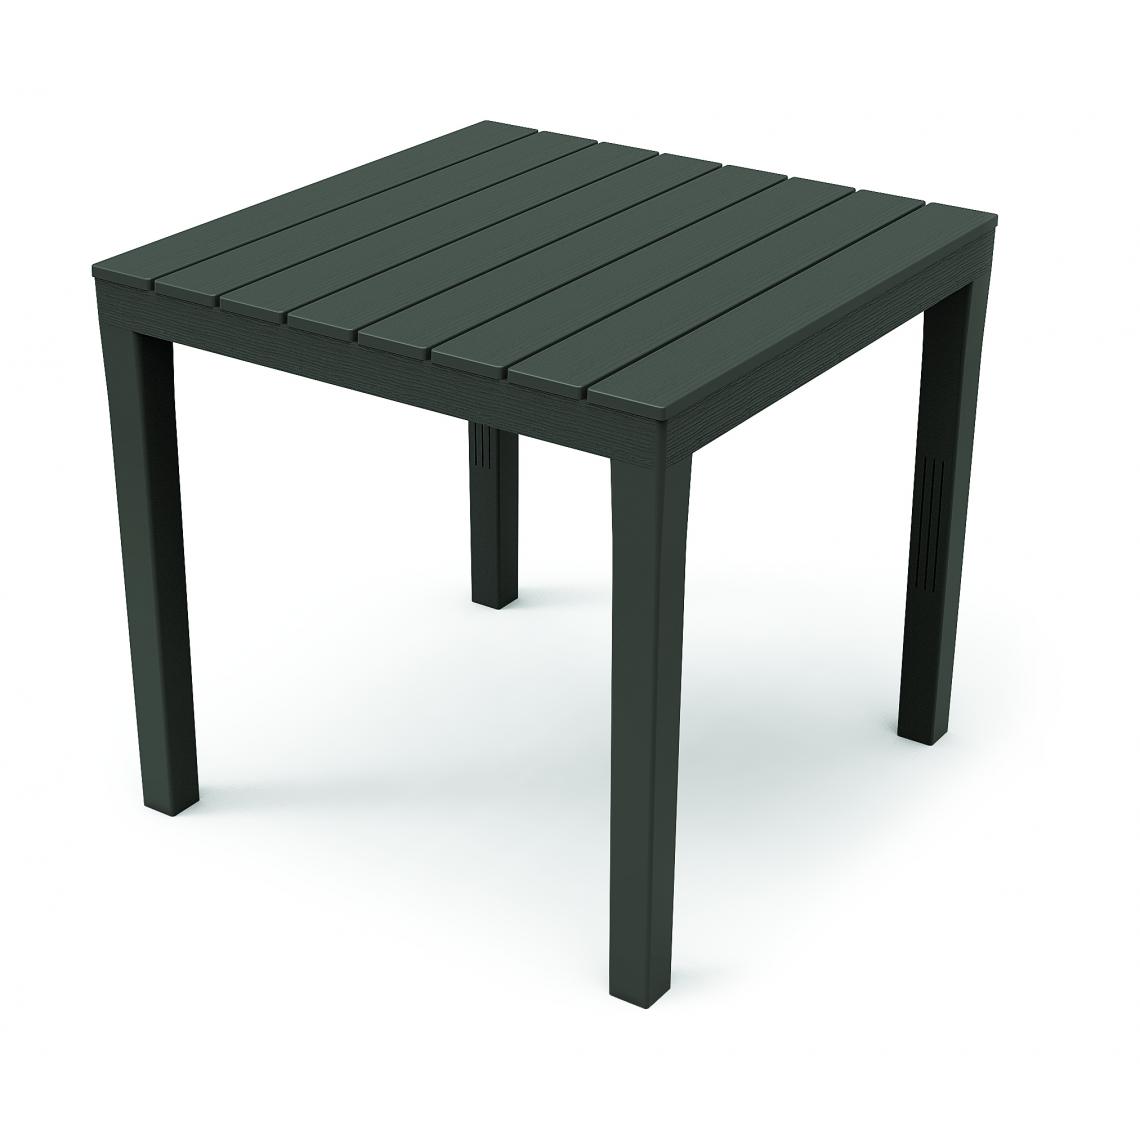 Alter - Table carrée modulable, Made in Italy, 78 x78x72 cm, couleur Anthracite - Tables à manger